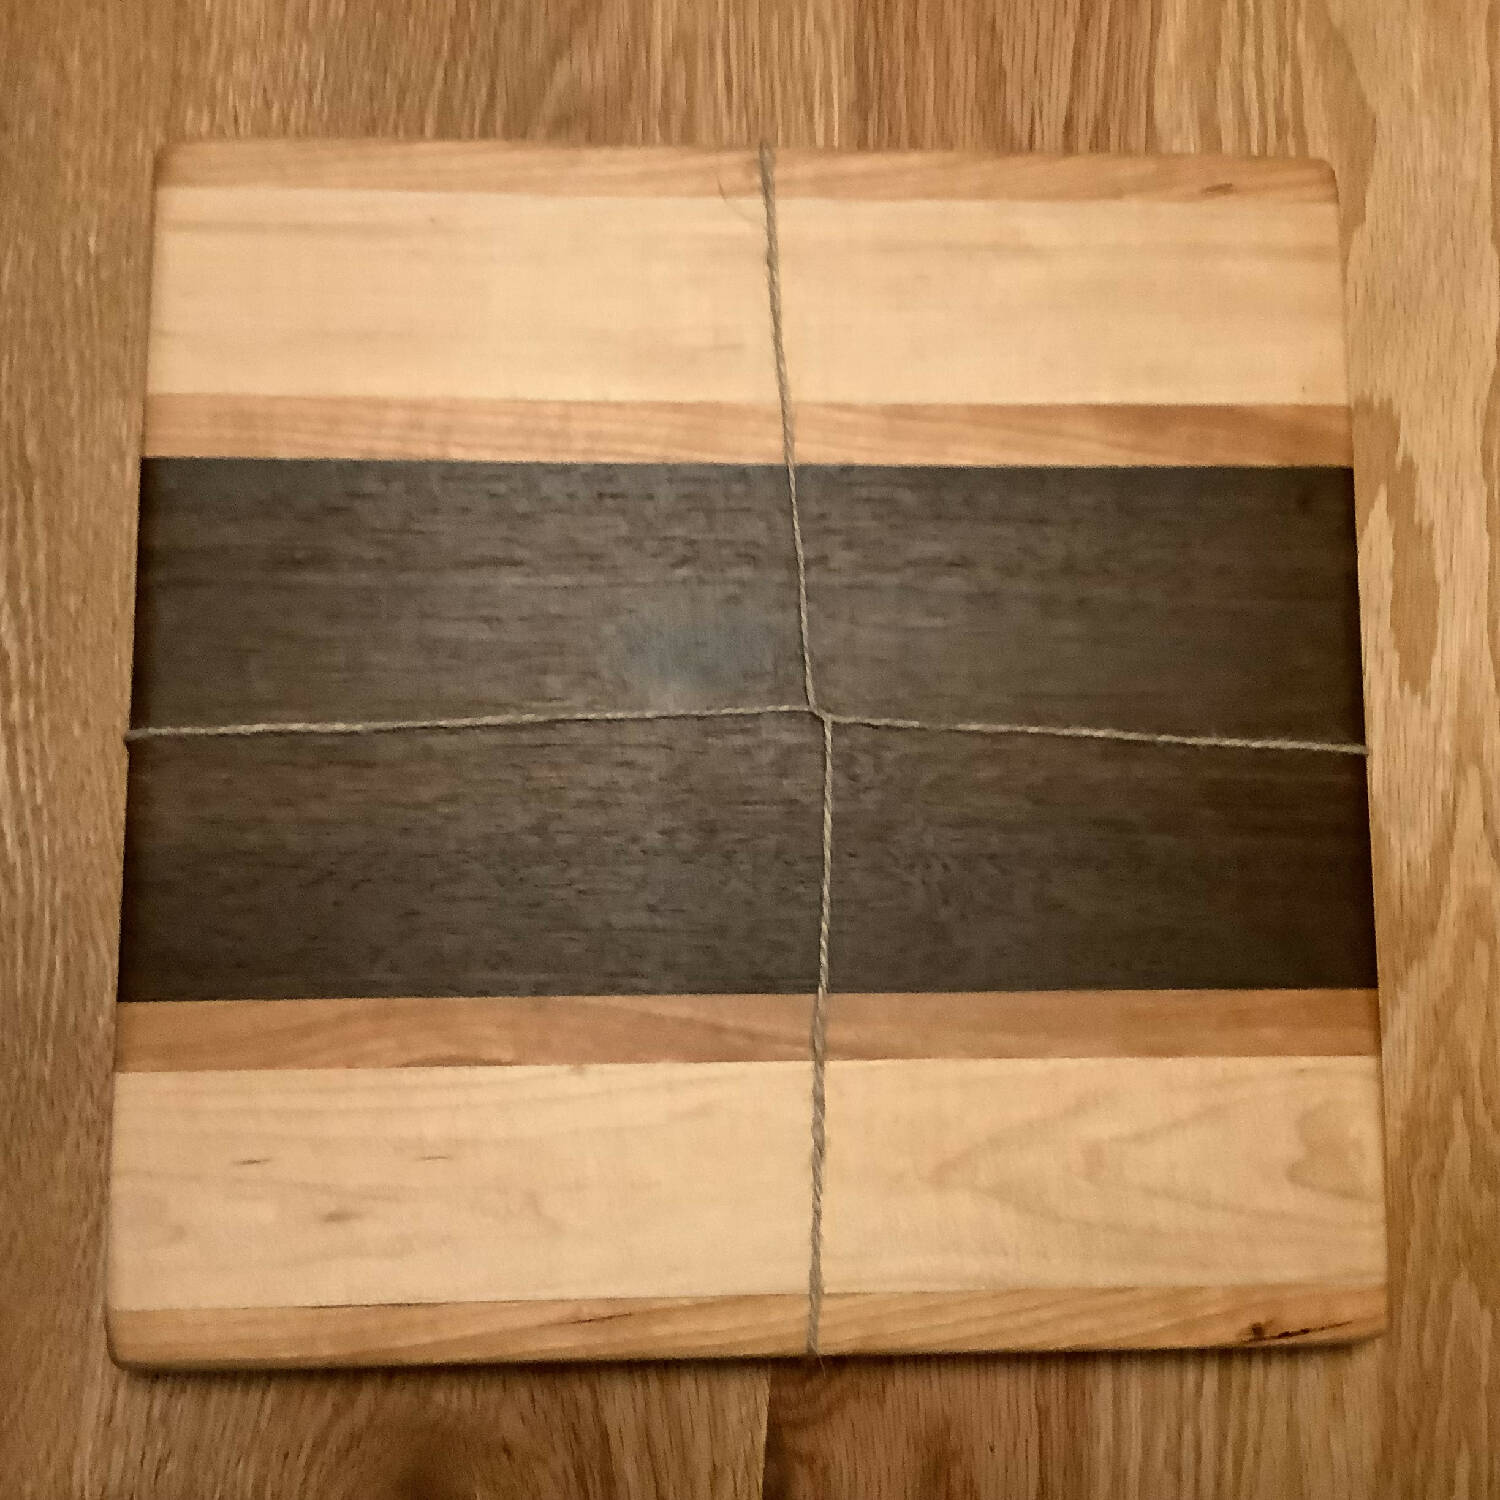 12” x 12” cutting board, walnut with cherry and maple stripes